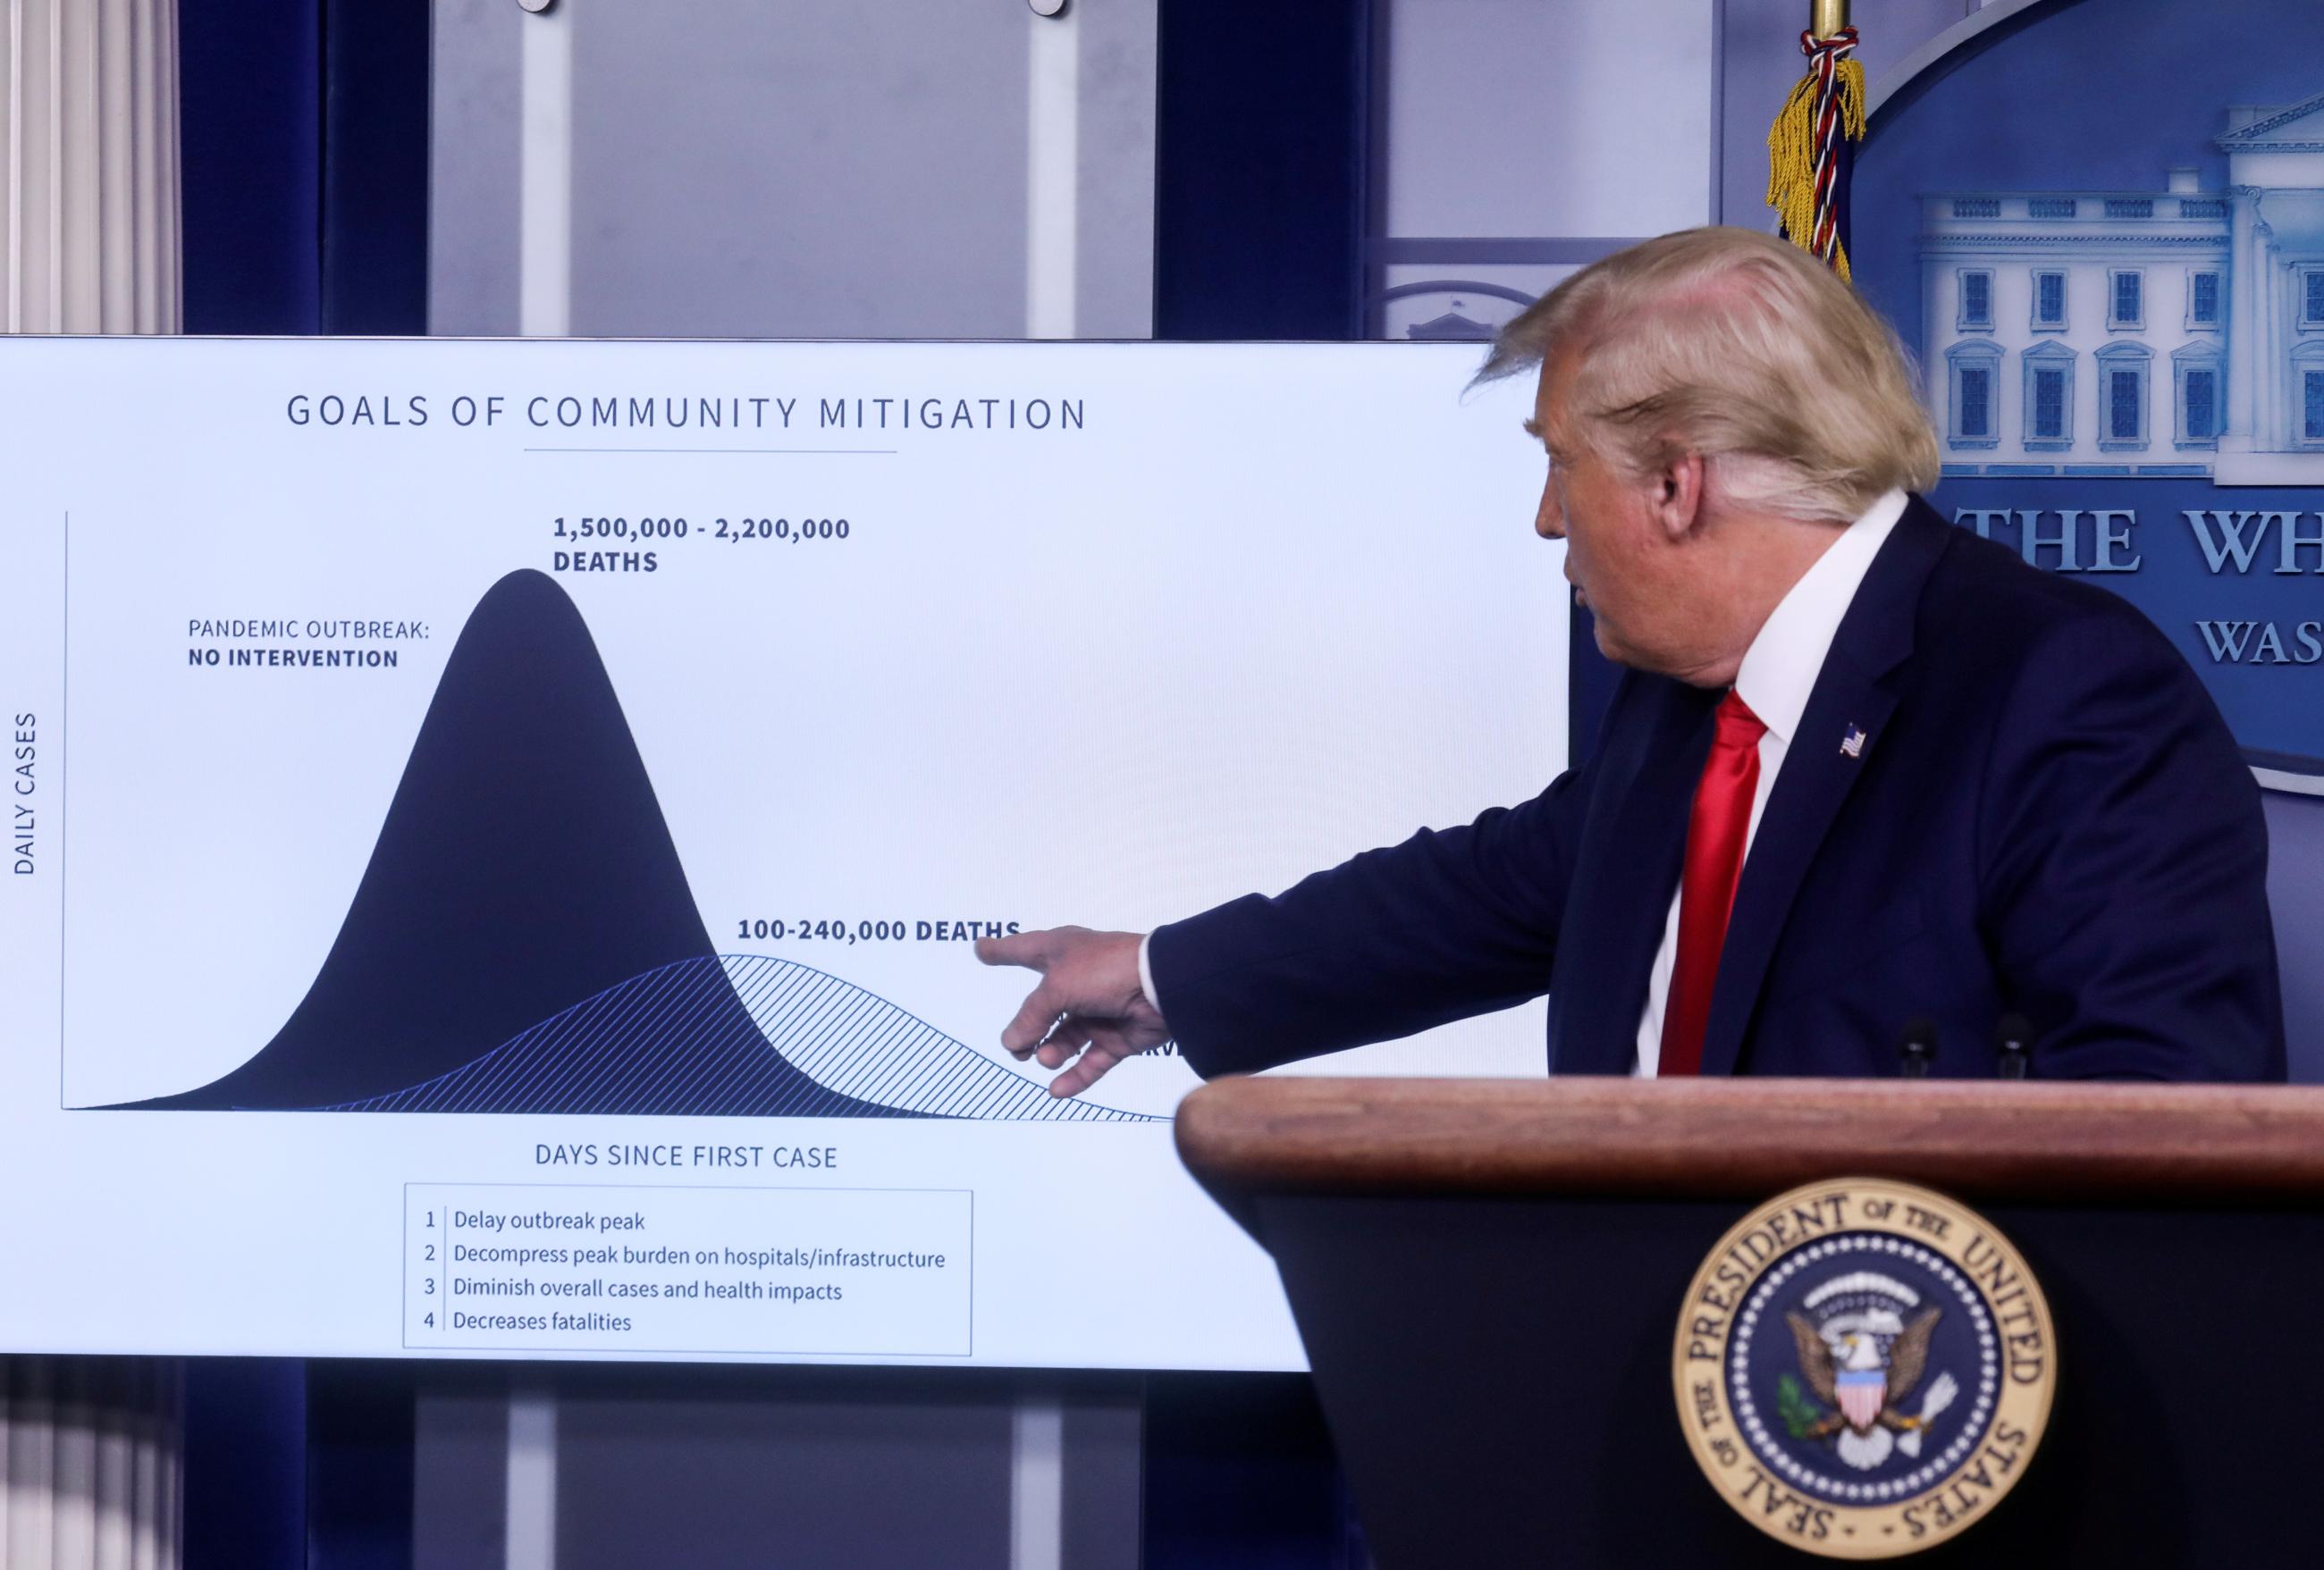 President Donald Trump points to a chart as he speaks about his administration's coronavirus disease (COVID-19) response during a news conference in the Brady Press Briefing Room at the White House.